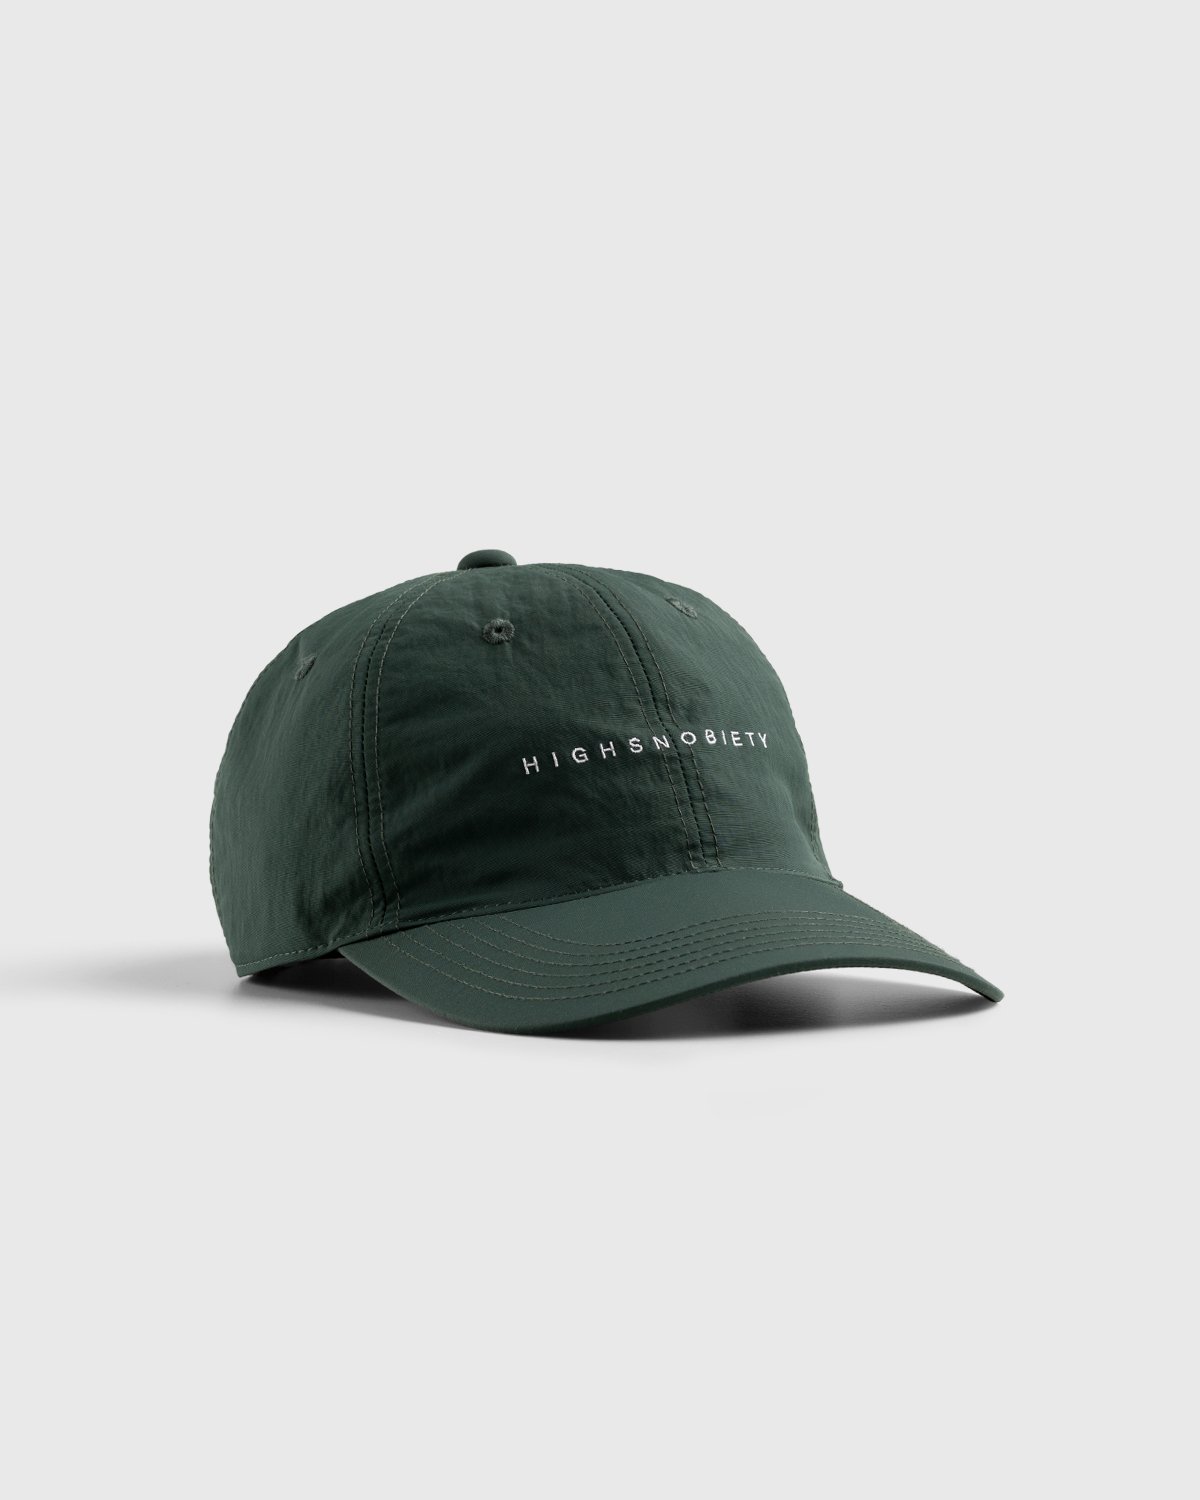 Highsnobiety - Brushed Nylon Ball Cap Green - Accessories - Green - Image 1